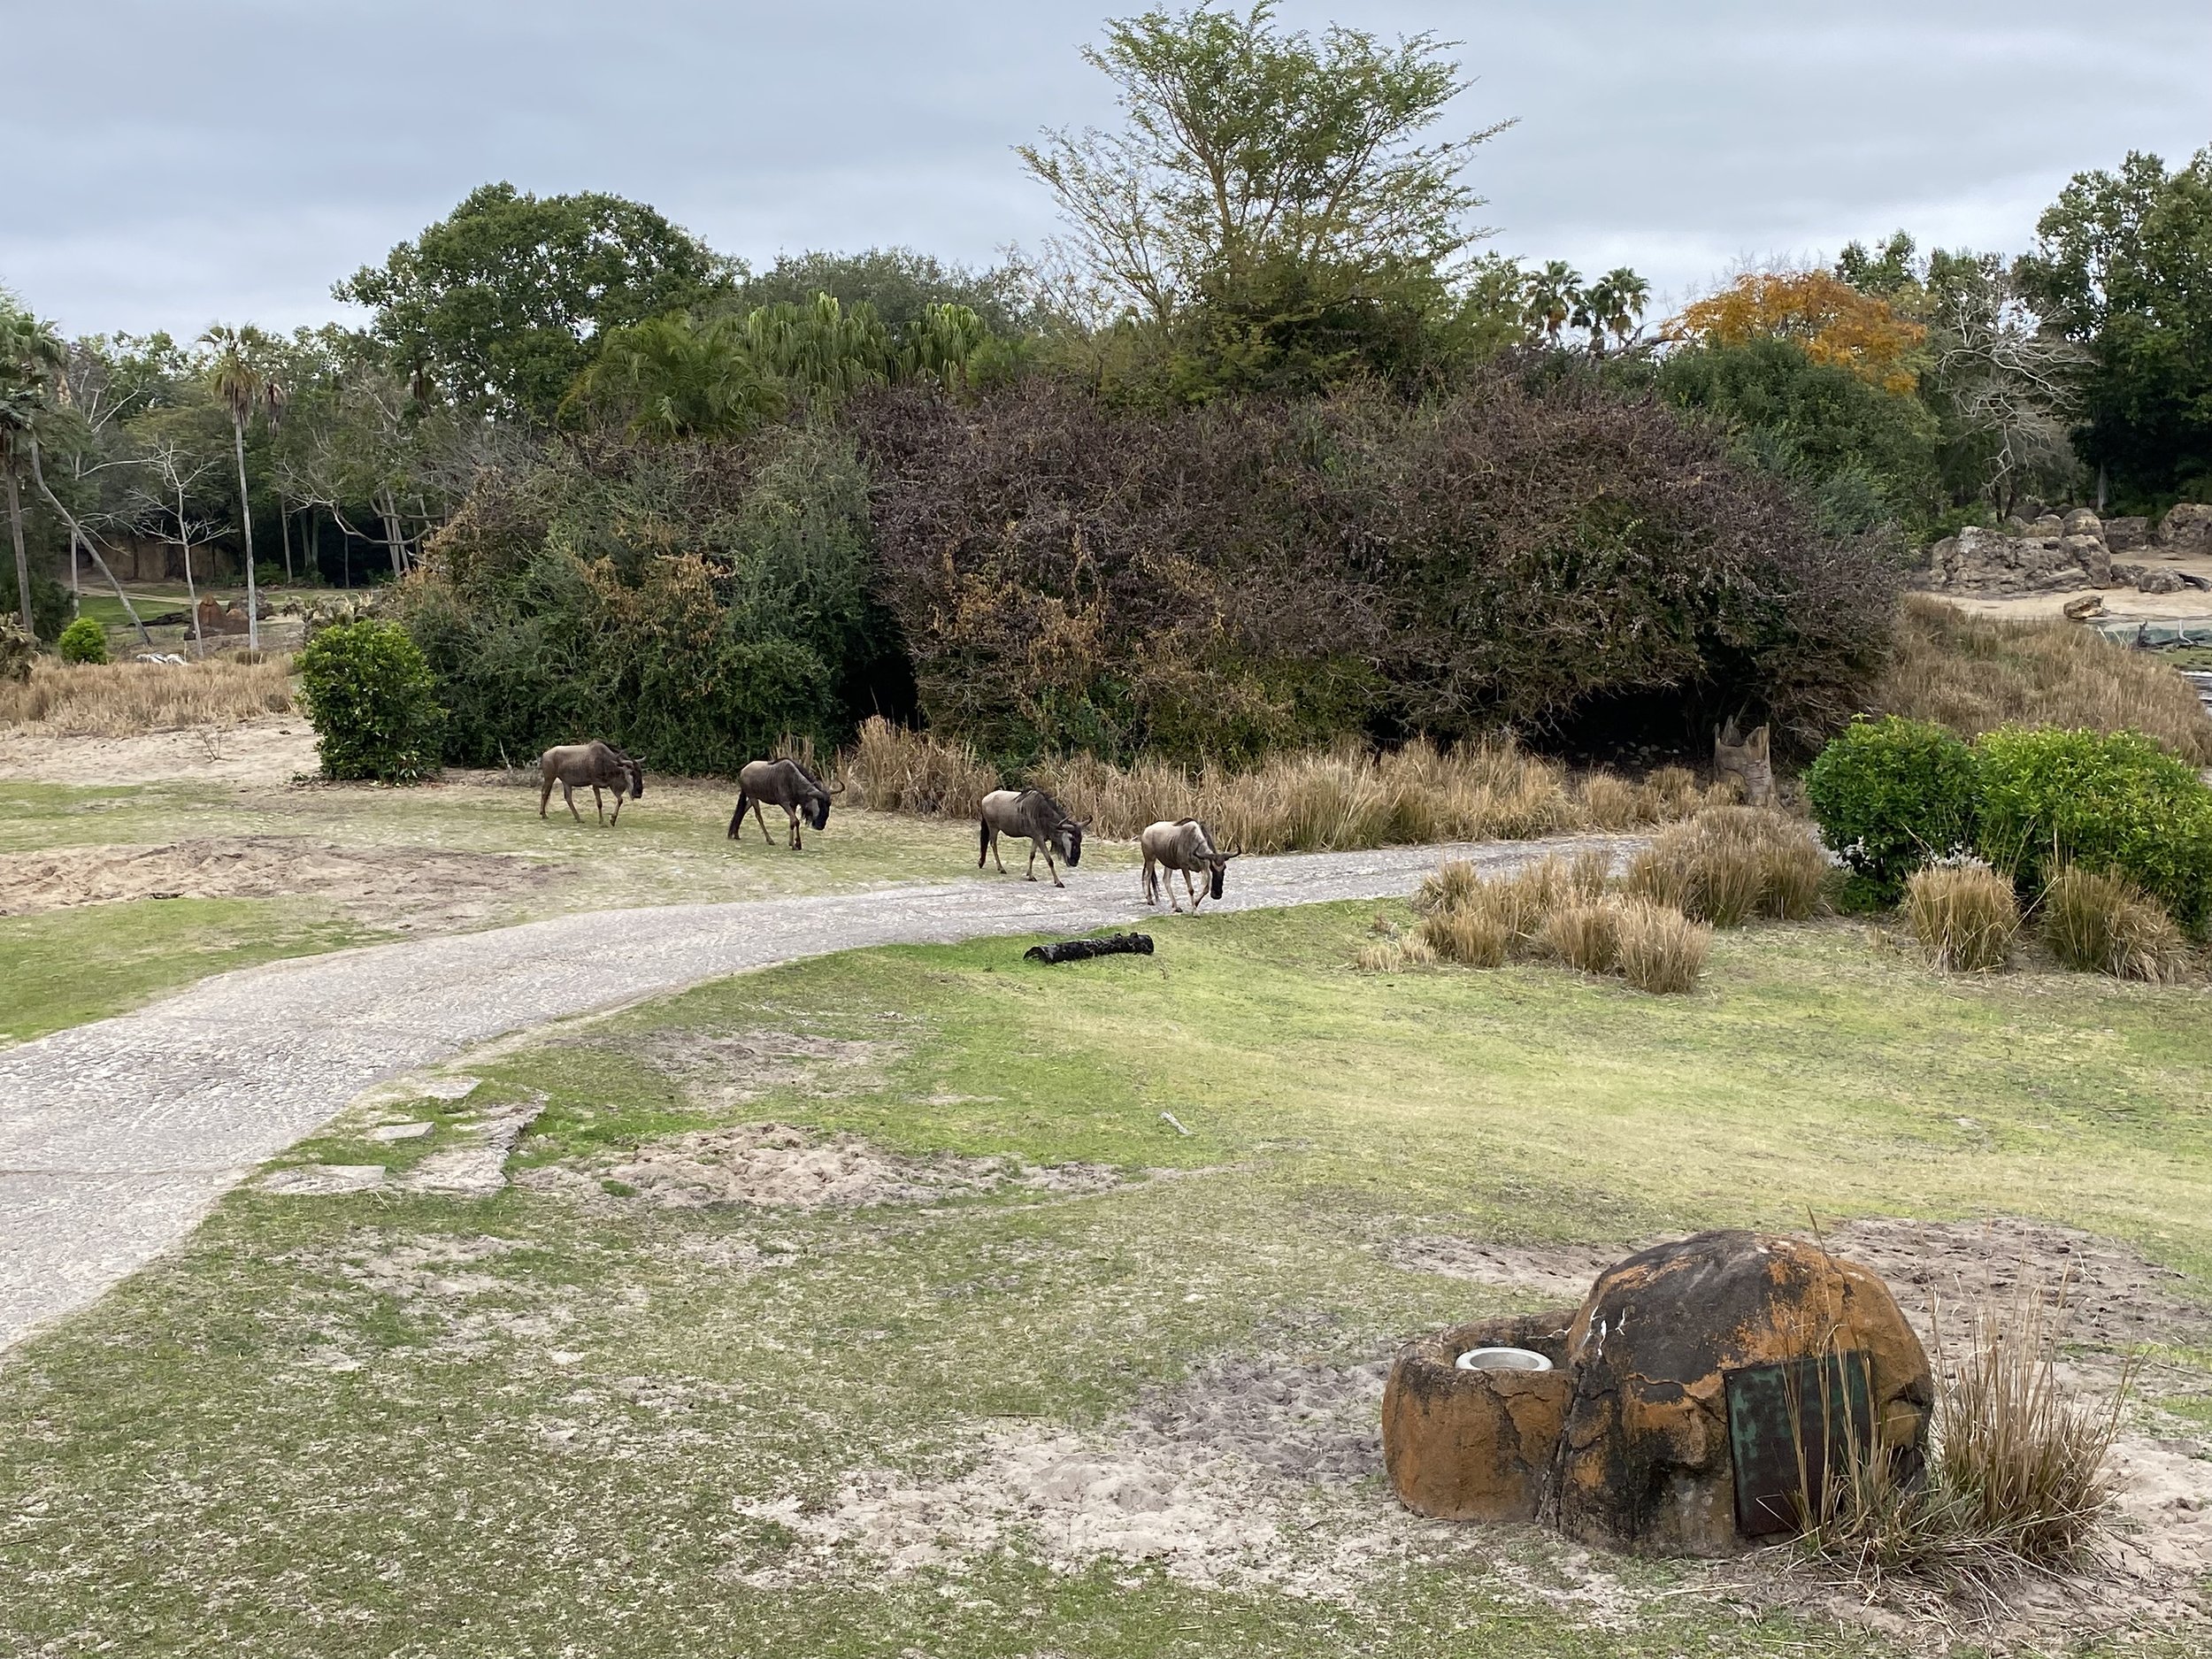  While our guides were preparing lunch we were able to photograph  the animals and take photos.    When you ride Kilimanjaro Safaris, you don’t get to spend a lot of time on the savanna, it’s more of a summary of the savanna..     But when you’re her